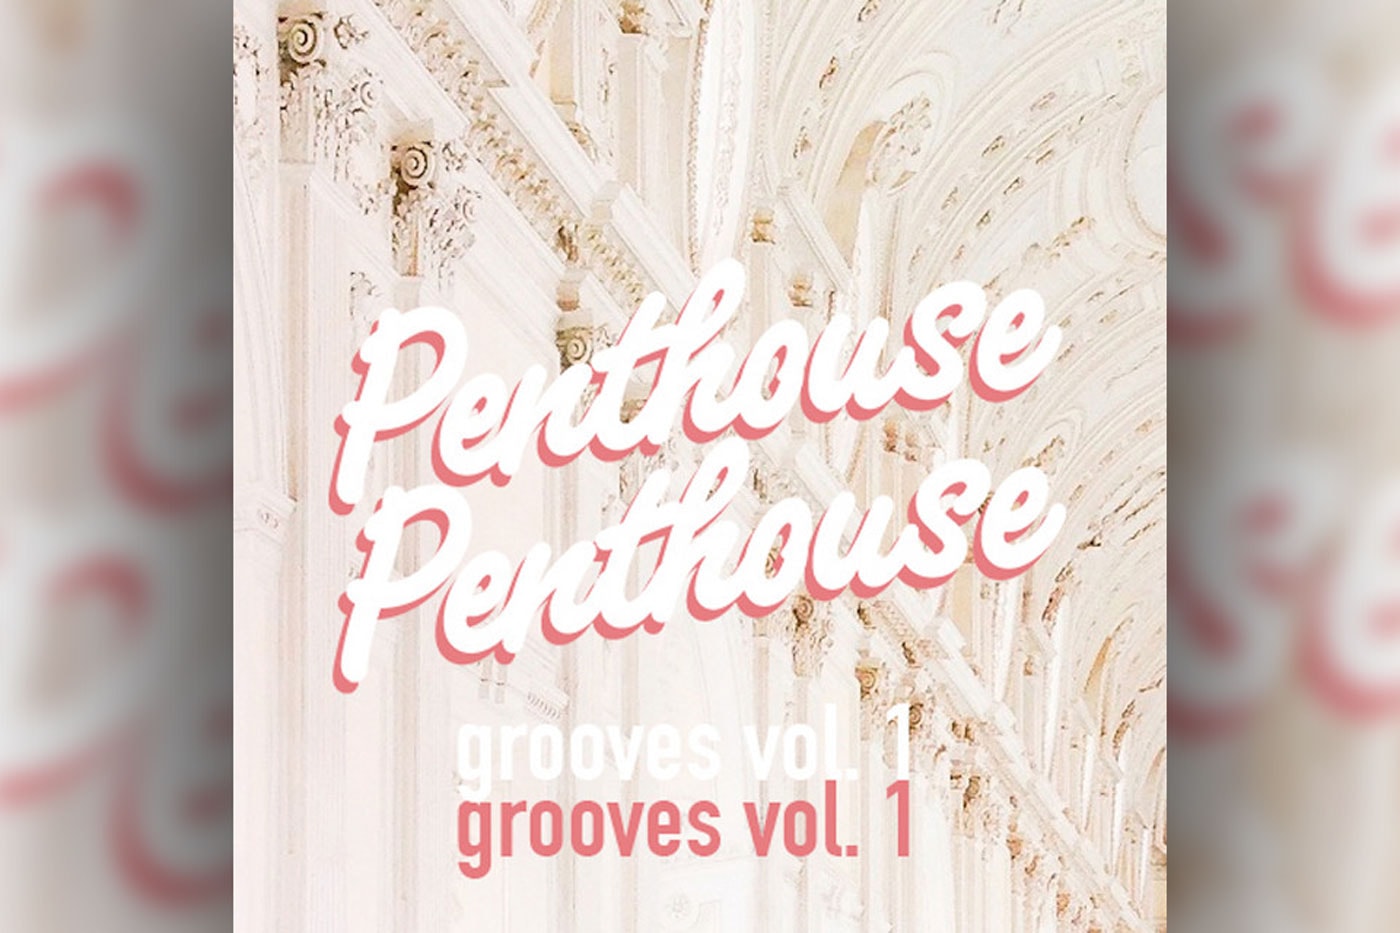 Penthouse Penthouse Drops Compilation of Unreleased Music